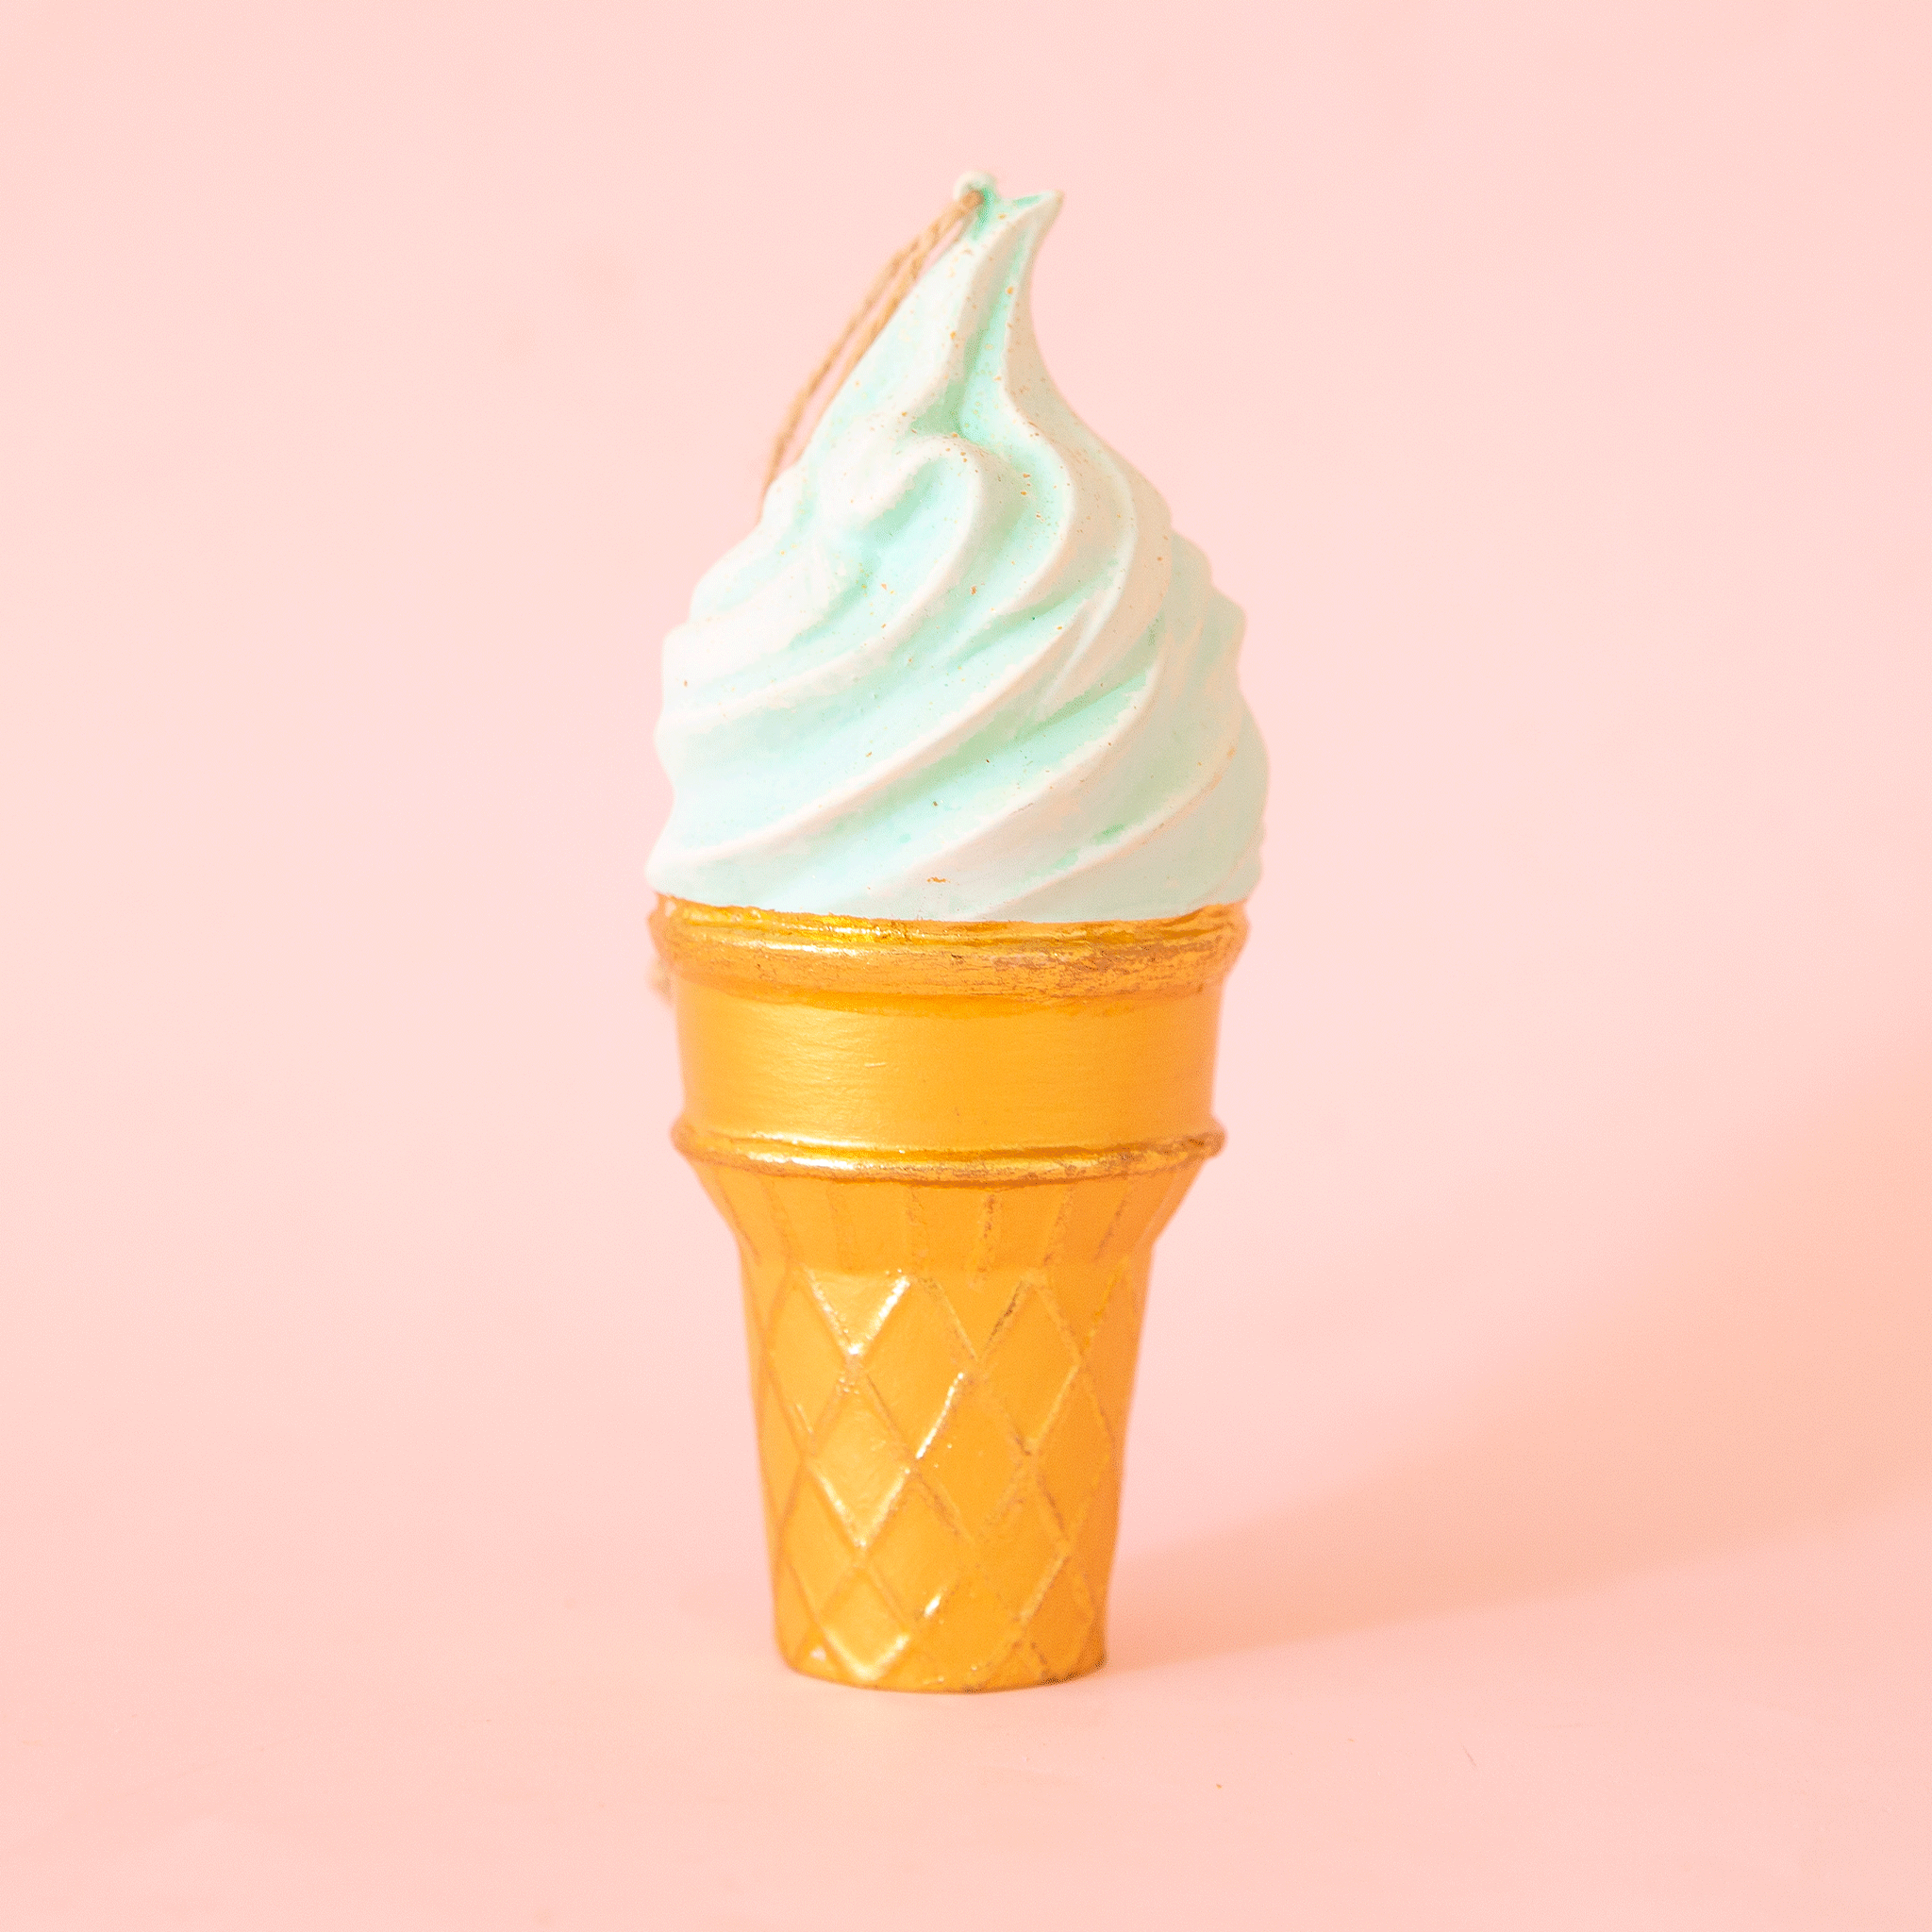 On a pink background is a mint green ice cream cone shaped ornament. 